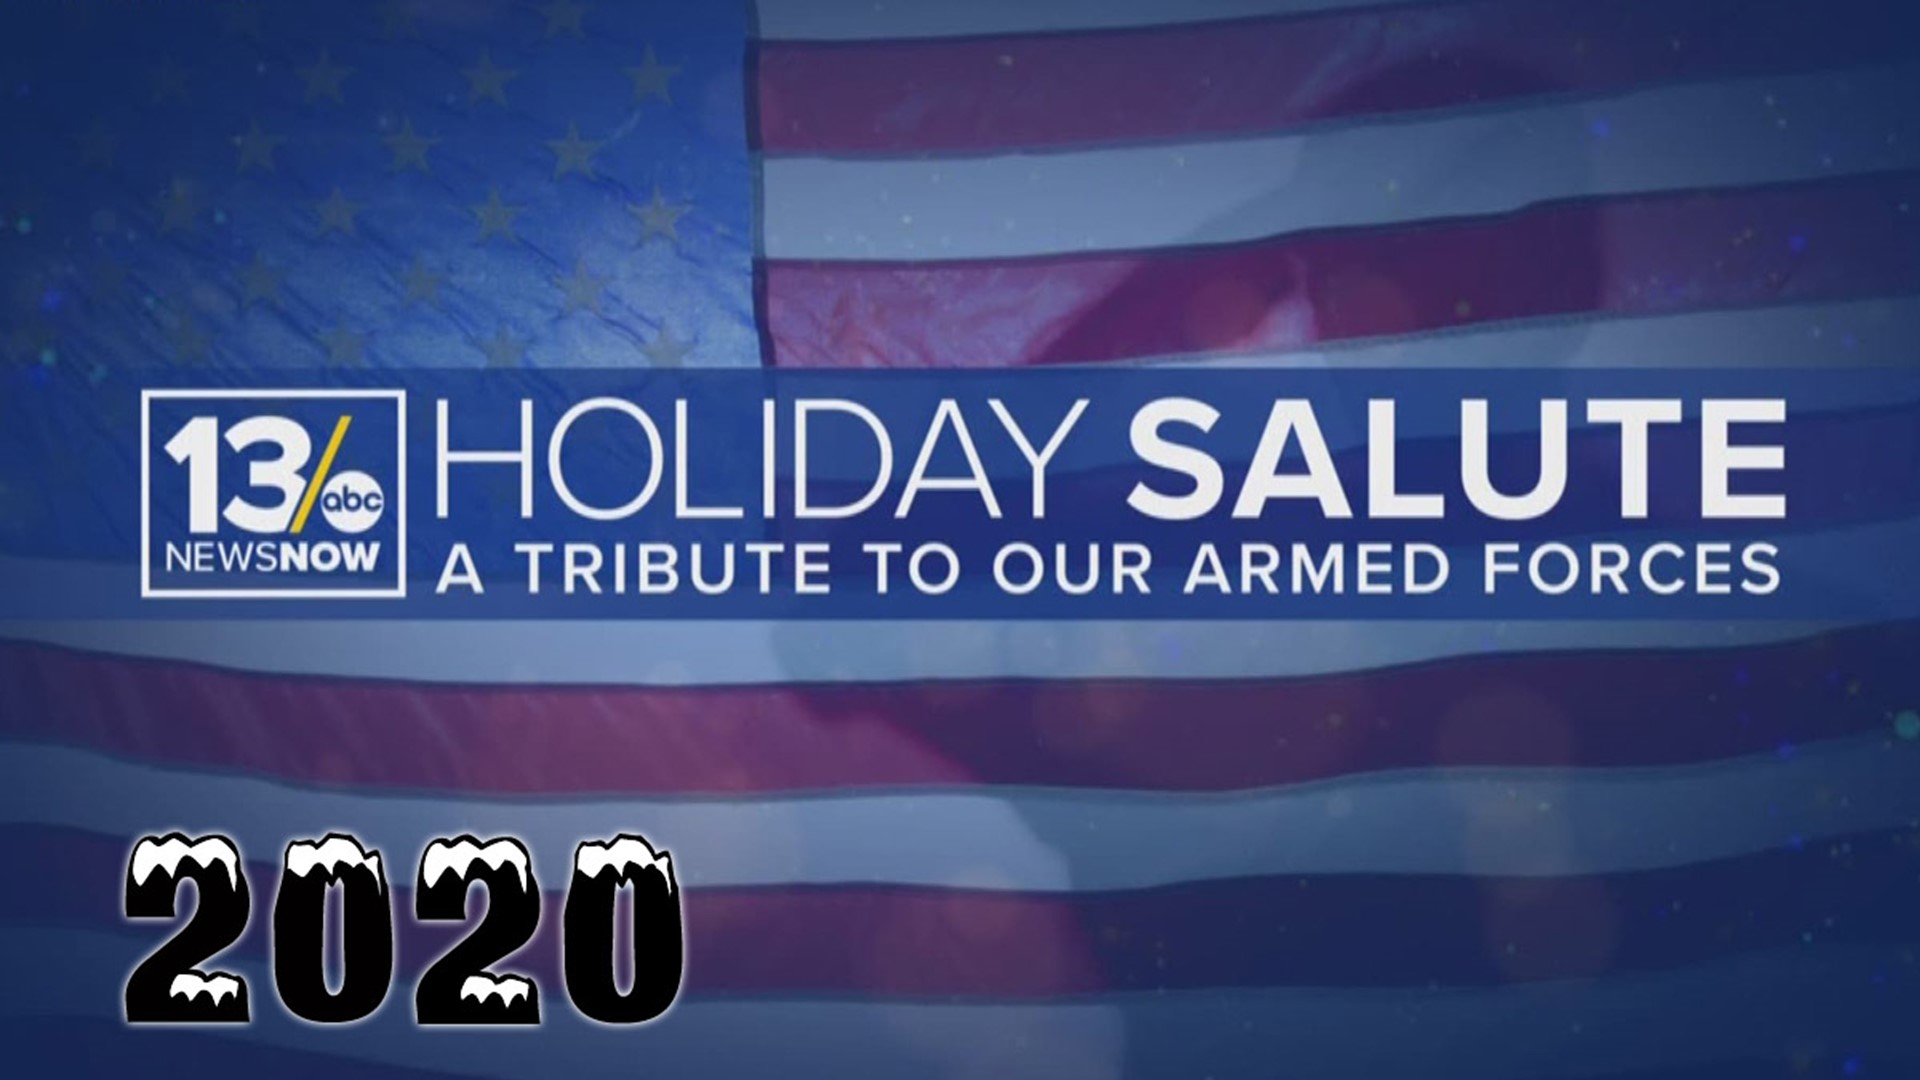 It's our station's annual tradition that recognizes service members and military families across Hampton Roads: the 35th Annual Holiday Salute!